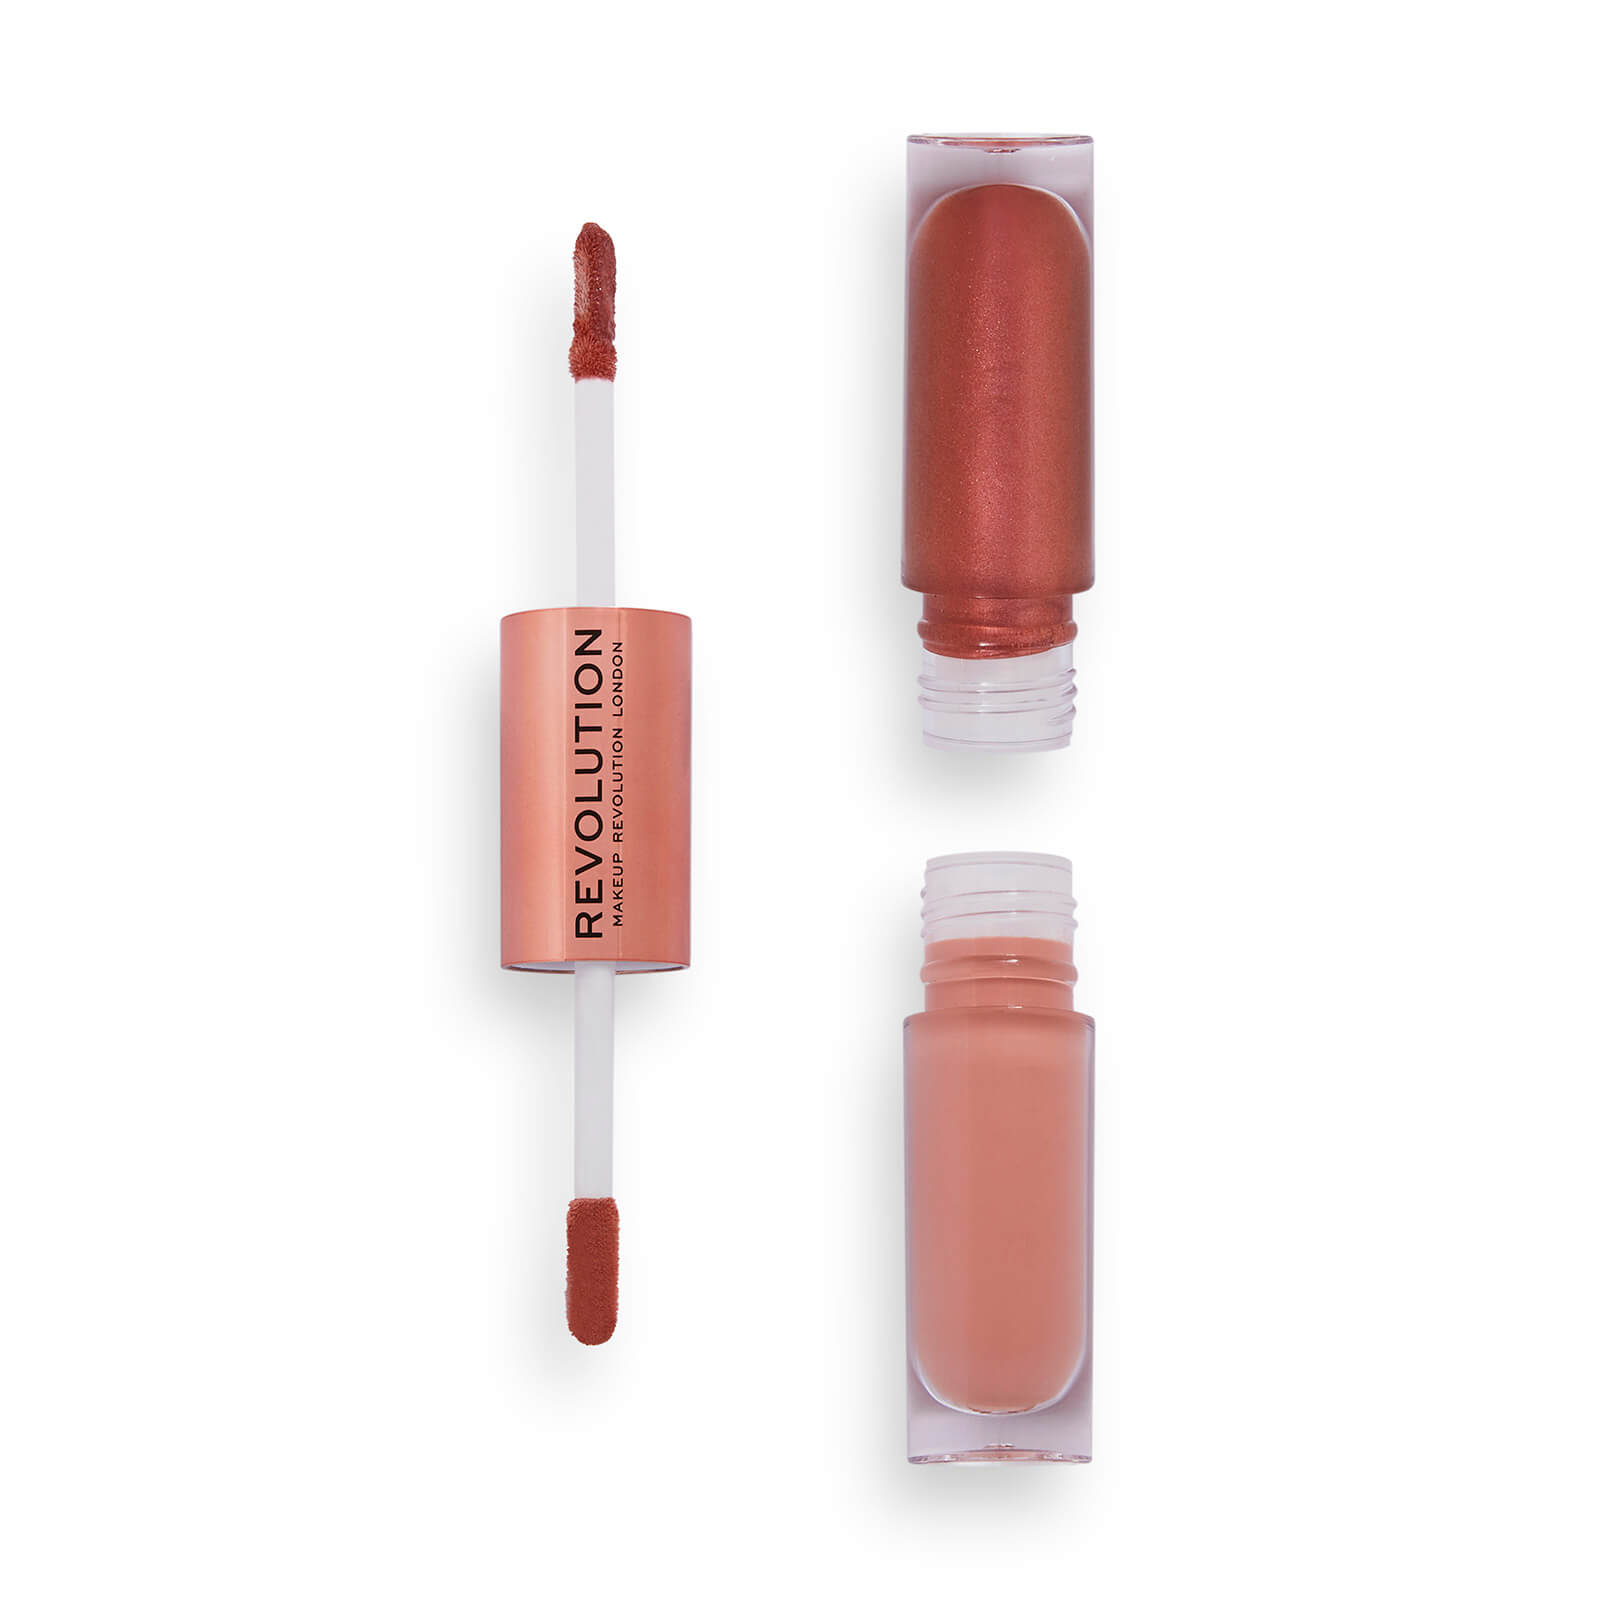 Revolution Beauty Revolution Double Up Liquid Shadow - Infatuated Rose Gold